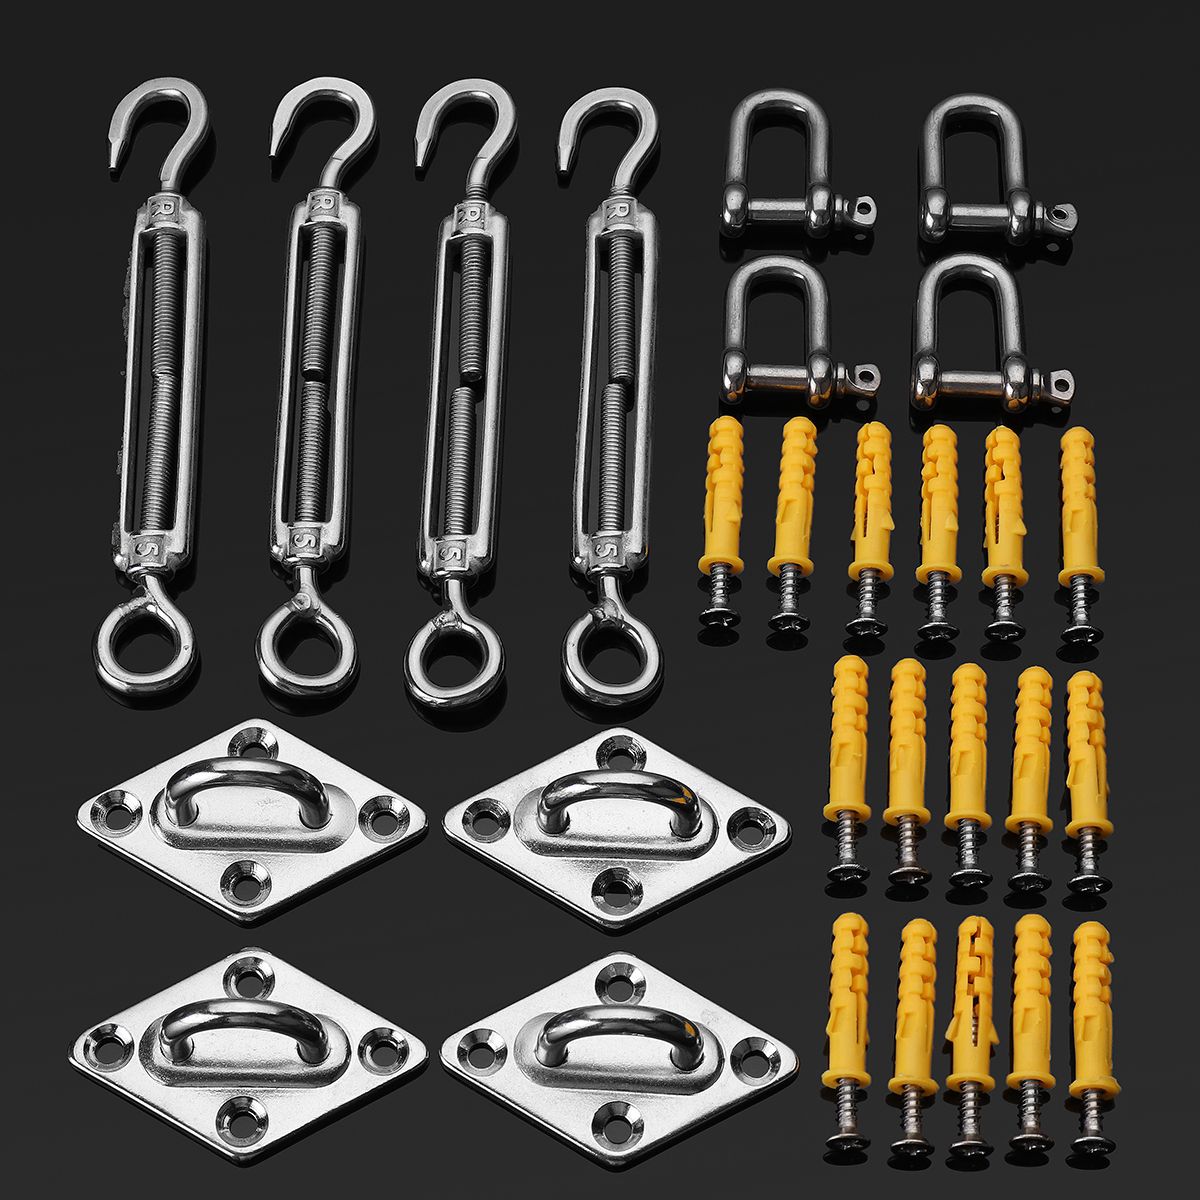 28Pcs-Sun-Shade-Sail-Accessories-for-Triangle-or-Square-Shade-Sail-Replacement-Fitting-Tools-Kit-1392249